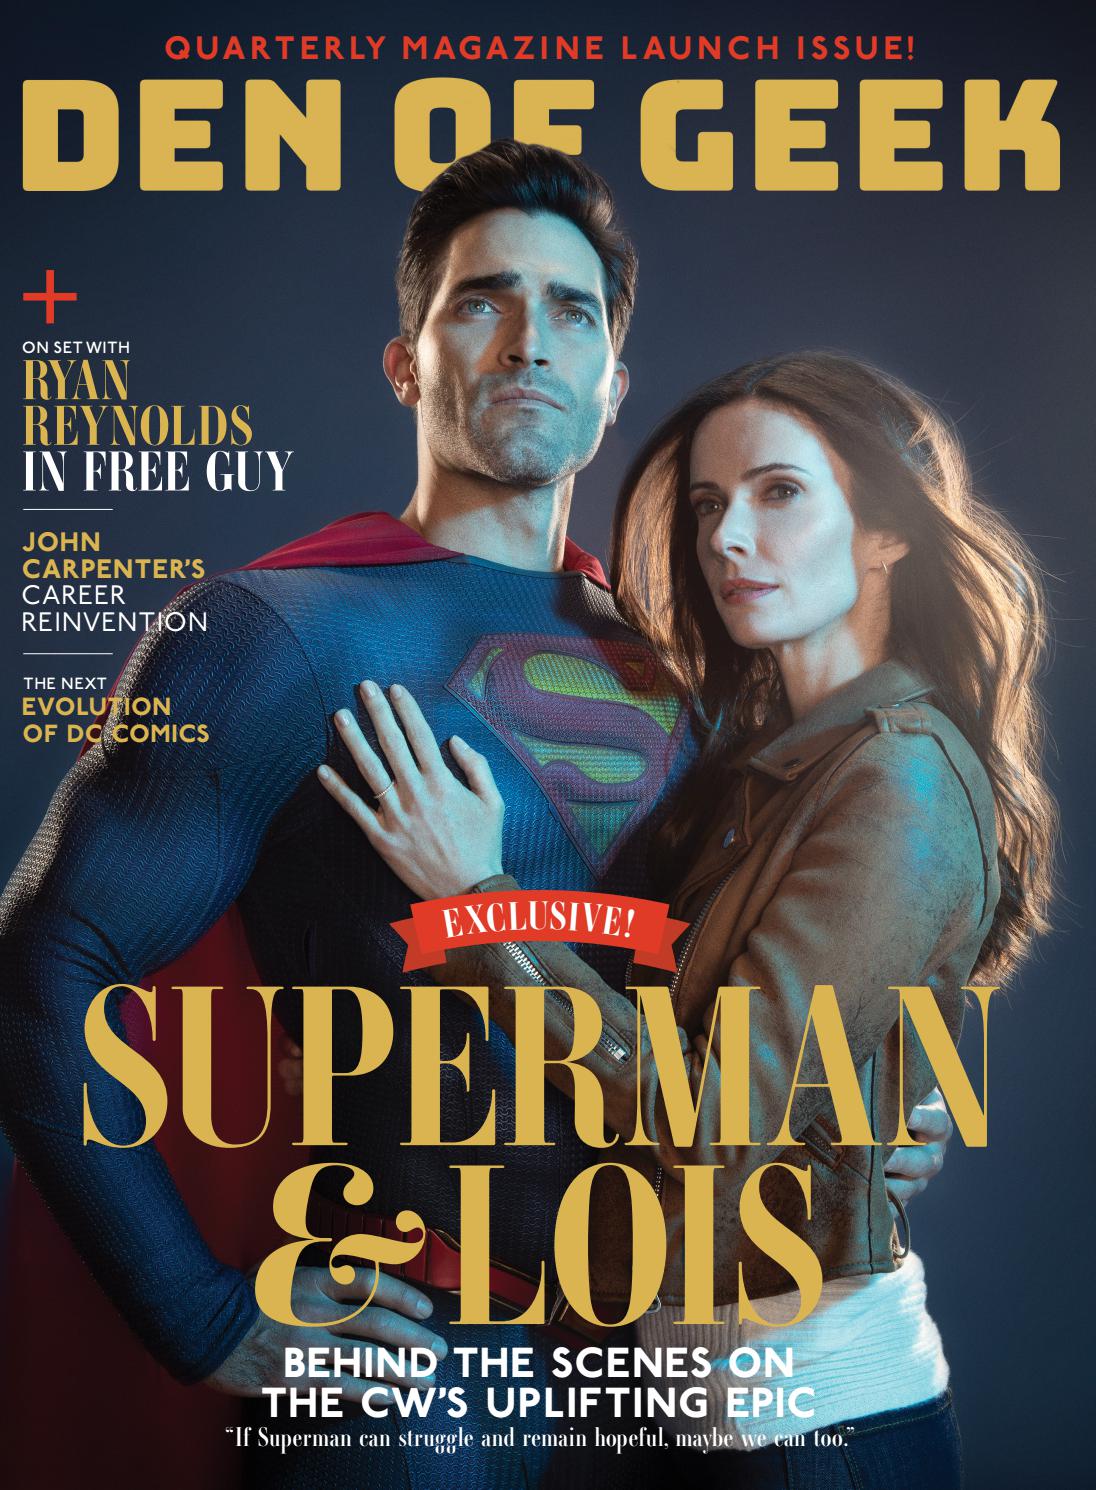 Den of Geek Quarterly Magazine Issue 1 - Featuring The CW&#x27;s Superman & Lois